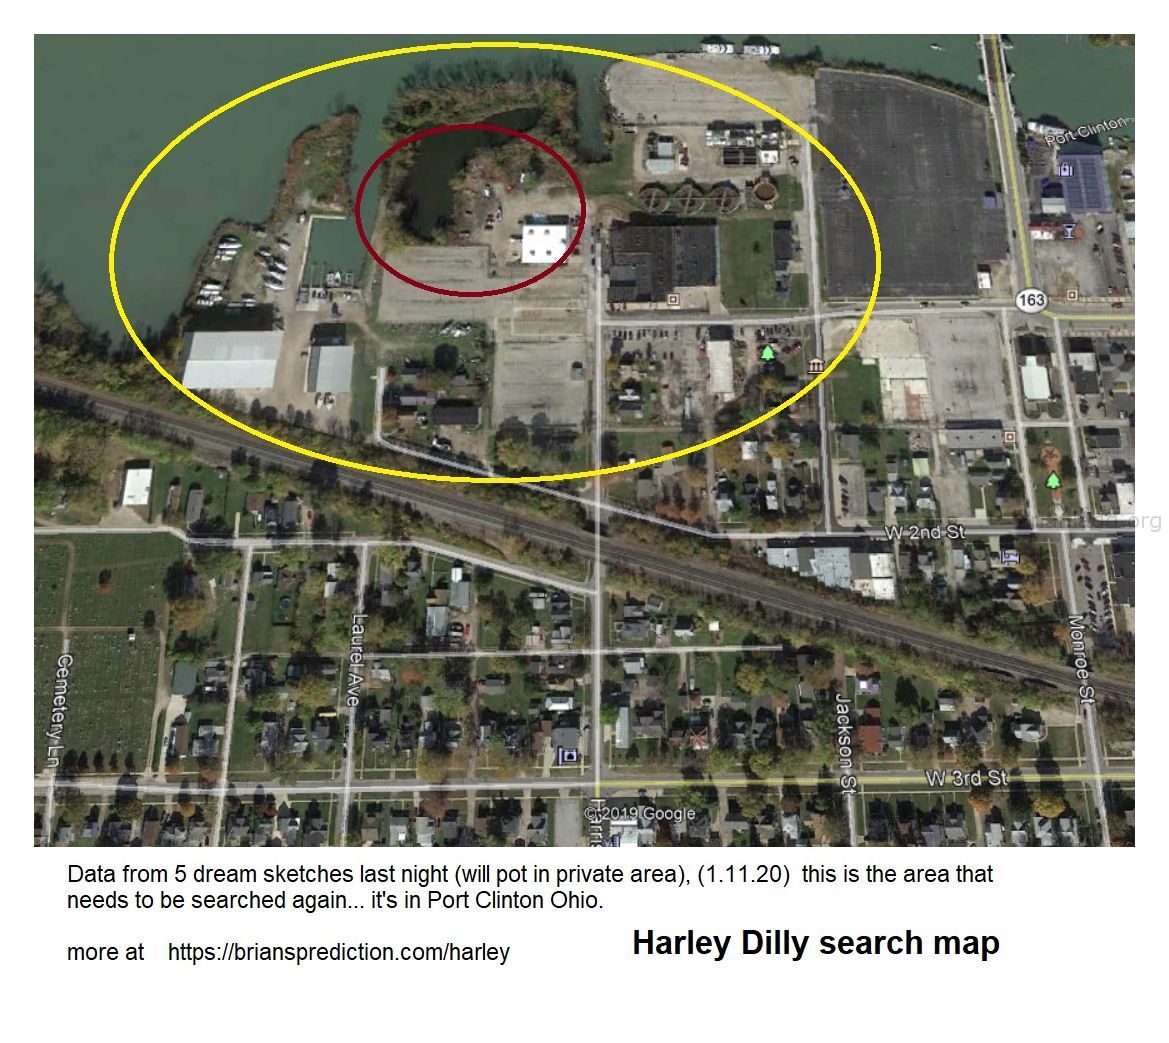 Harley Dilly Missing Teen Located These Dreams Are Related Harley Dilly Search Map Psychic Brian Ladd 12579 11 January 2...
Harley Dilly Search Map  Data From 5 Dream Sketches Last Night (will Pot In Private Area), (1.11.20) This Is The Area That Needs To Be Searched Again... It'S In Port Clinton Ohio.  1.13.20  Harley Dilly Case, I Will Be Posting New Dreams Every Day At Until Harley Comes Home To His Family.  Brian Ladd  Cae Info  Harley Dilly Is A 14-Year-Old Port Clinton, Ohio Boy And Youtuber Who Has Been Missing Since He Left For School On December 20, 2019. He Hasnâ€™T Been Seen Since.  Harley Was An Avid User Of Social Media, And He Posted A Slew Of Madden Gaming Videos Online, Among Others, As He Sought Youtube Stardom; This Is Raising Concern, As The Teenager Even Posted His Phone Number With One Video. However, Authorities Initially Said They Didnâ€™T Think The Boy Was Abducted. That Was Early On, Though.  They Are Aggressively Looking For Him, And Multiple Agencies Are Involved. The Community Has Banded Together, Helping Search For Harley And Raising Reward Money To Assist In Finding Him. The Chief, Rob Hickman, Has Repeatedly Asked People To Stop Sharing Rumors.  It Appears That Harley Dilly Simply Vanished Into Thin Air. The Boyâ€™S Disappearance Was Featured On An Episode Of Livepd, And His Mother Has Posted On Facebook And Appeared On Television About The Case.  Hereâ€™S What You Need To Know:  1. Harley Was Last Seen Leaving For School But He Never Arrived There, Police Say  Harleyâ€™S Missing Personâ€™S Picture Is The Cover Photo Of The Port Clinton, Ohio Police Departmentâ€™S Facebook Page. It Says That Harley Dilly Was Born On August 12, 2005 And Disappeared On December 20, 2019. Heâ€™S A White Male With Brown Hair And Green Eyes, Who Stands 4 Foot 9 Inches Tall And Weighs 100 Pounds. He Disappeared From Port Clinton, Ohio, And Is 14 Years Old.  When Last Seen, Harley Was Wearing A Maroon Puffer Jacket, Grey Sweatpants, And Black Tennis Shoes. He Wears Eyeglasses. People With Information Should Call The Port Clinton Police Department At 419-734-3121.  Â€Œhe Was Supposed To Go To School That Day. He Didnâ€™T Come Home,Â€ Said The Police Chief In A Press Conference. The Parents Became Concerned. He Went Missing On A Friday; Police Were Notified On That Saturday. The Parents Felt He Had Â€Œstayed Out All Night Before,Â€ And When He Didnâ€™T Come Home, They Became Concerned, About 24 Hours Later. The Chief Found Out On Facebook That Harleyâ€™S Mom Had Posted About Her Concern. The Extensive Investigation Was Started Monday. According To The Chief, Harleyâ€™S Habit Was To Stay With Friends When There Were Issues In The Home.  According To Police, Harley Â€Œwas Last Seen On December 20th, 2019 In Port Clinton, Ohio, As Harley Was Leaving For School Between The Hours Of 6:00am And 7:00am But Never Arrivedâ€¦Law Enforcement Is Concerned For His Safety.Â€ In A Press Conference, The Chief Said Harley Had Complained Of Feeling Sick But Was Told To Go To School.  On January 3, 2020, Pat Adkins, The Local School Superintendent Posted A Message To Parents That Explained That The District Was Working Closely With Port Clinton Police To Locate Missing High School Student, Harley Dilly. Counseling Was Available For Those Who Needed It.  Port Clinton Police, In A December 31, 2019 Update, Said That Harleyâ€™S Family Has Â€Œfully Cooperated And We Have No Reason To Believe They Are Involved.Â€ They Added, Â€Œour Investigators Continue To Research The Records That We Have Been Able To Obtain Thus Far. The Investigation Is Being Conducted By Federal, State And Local Law Enforcement Partners.Â€  Police Asked People To Stop Spreading Rumors. Â€Œplease Allow The Professionals Involved In This Case To Continue To Do Their Job Â€“ We Are Working Tirelessly And Will Continue To Do So Until Harley Is Brought Home And Reunited With His Family,Â€ They Wrote.  2. Harleyâ€™S Dad Is A Garbage Truck Driver & His Mother Has Urged Him To Come Home In Emotional Television Appearances  Mother Of Harley Dilly Pleads For His Safe Returnthe Mother Of A Missing Port Clinton Teenager Said There Are "no Words&Quot; To Describe What She And Her Family Are Going Through.2020-01-03t23:18:08.000z  Harleyâ€™S Parents Are Named Heather And Marcus Dilly. Harleyâ€™S Momâ€™S Profile Picture Shows A Candle And The Hashtag, #comehomeharleydilly. Heather Dilly Wrote That She Is Married To Marcus Dilly. She Describes Herself As Â€Œdaughter, Wife, Mom, Aunt And Mimiâ€¦To Some A Sister, Never By Blood But Always By Heart Ðÿ’œâ€  According To The Sandusky Register, Harleyâ€™S Mom Posted A No Longer Visible Video To Facebook, Saying, Â€Œyou All Want To See What I Look Like When Iâ€™M Not Taking My Meds To Help? You Want To Know What Itâ€™S Like To Have A Son Missing? It Hurts. It Makes You Feel Like You Canâ€™T Go On. But You Have To Go On. You Donâ€™T Understand. You Seriously Donâ€™T Know What It Feels Like.Â€  Marcus And Heather Dilly  Marcus Dillyâ€™S Facebook Page Says He Is A Truck Driver At Republic Trash Services Who Is From Cleveland. In 2015, He Wrote, Â€Œmy Wife Is Such A Great Person. She Takes Care Of Everything And Everyone And I Come Home To A Clean Home And Good Meal. She Deserves Hugs Kisses And Flowers More Often. I Love You Heather Styndl Dilly.Â€  Heather Dilly Told Cleveland Abc Station Wews. Â€Œi Mean, Somebody Had To Have Seen Something. You See Everything On Tv, You Watch All These Crime Shows And You Think, Â€˜Oh, Thatâ€™S Never Going To Happen.Â€™ And They Solve It In An Hour. It Doesnâ€™T Take An Hour To Find Out Everything. I Love You Harley, Please Come Home. Please, I Just Â€¦ We Need You, I Donâ€™T Believe That You Ran, But If You Did Just Please, This Isnâ€™T You.Â€  She Added: Â€Œthe Scrutiny That Comes With It, Nobody Tells You How Youâ€™Re Going To Be Bashed And Your Family. And The Biggest Focus Is Harley. Thatâ€™S The Biggest Thing. You Know, Everybody Can Think Whatever They W
